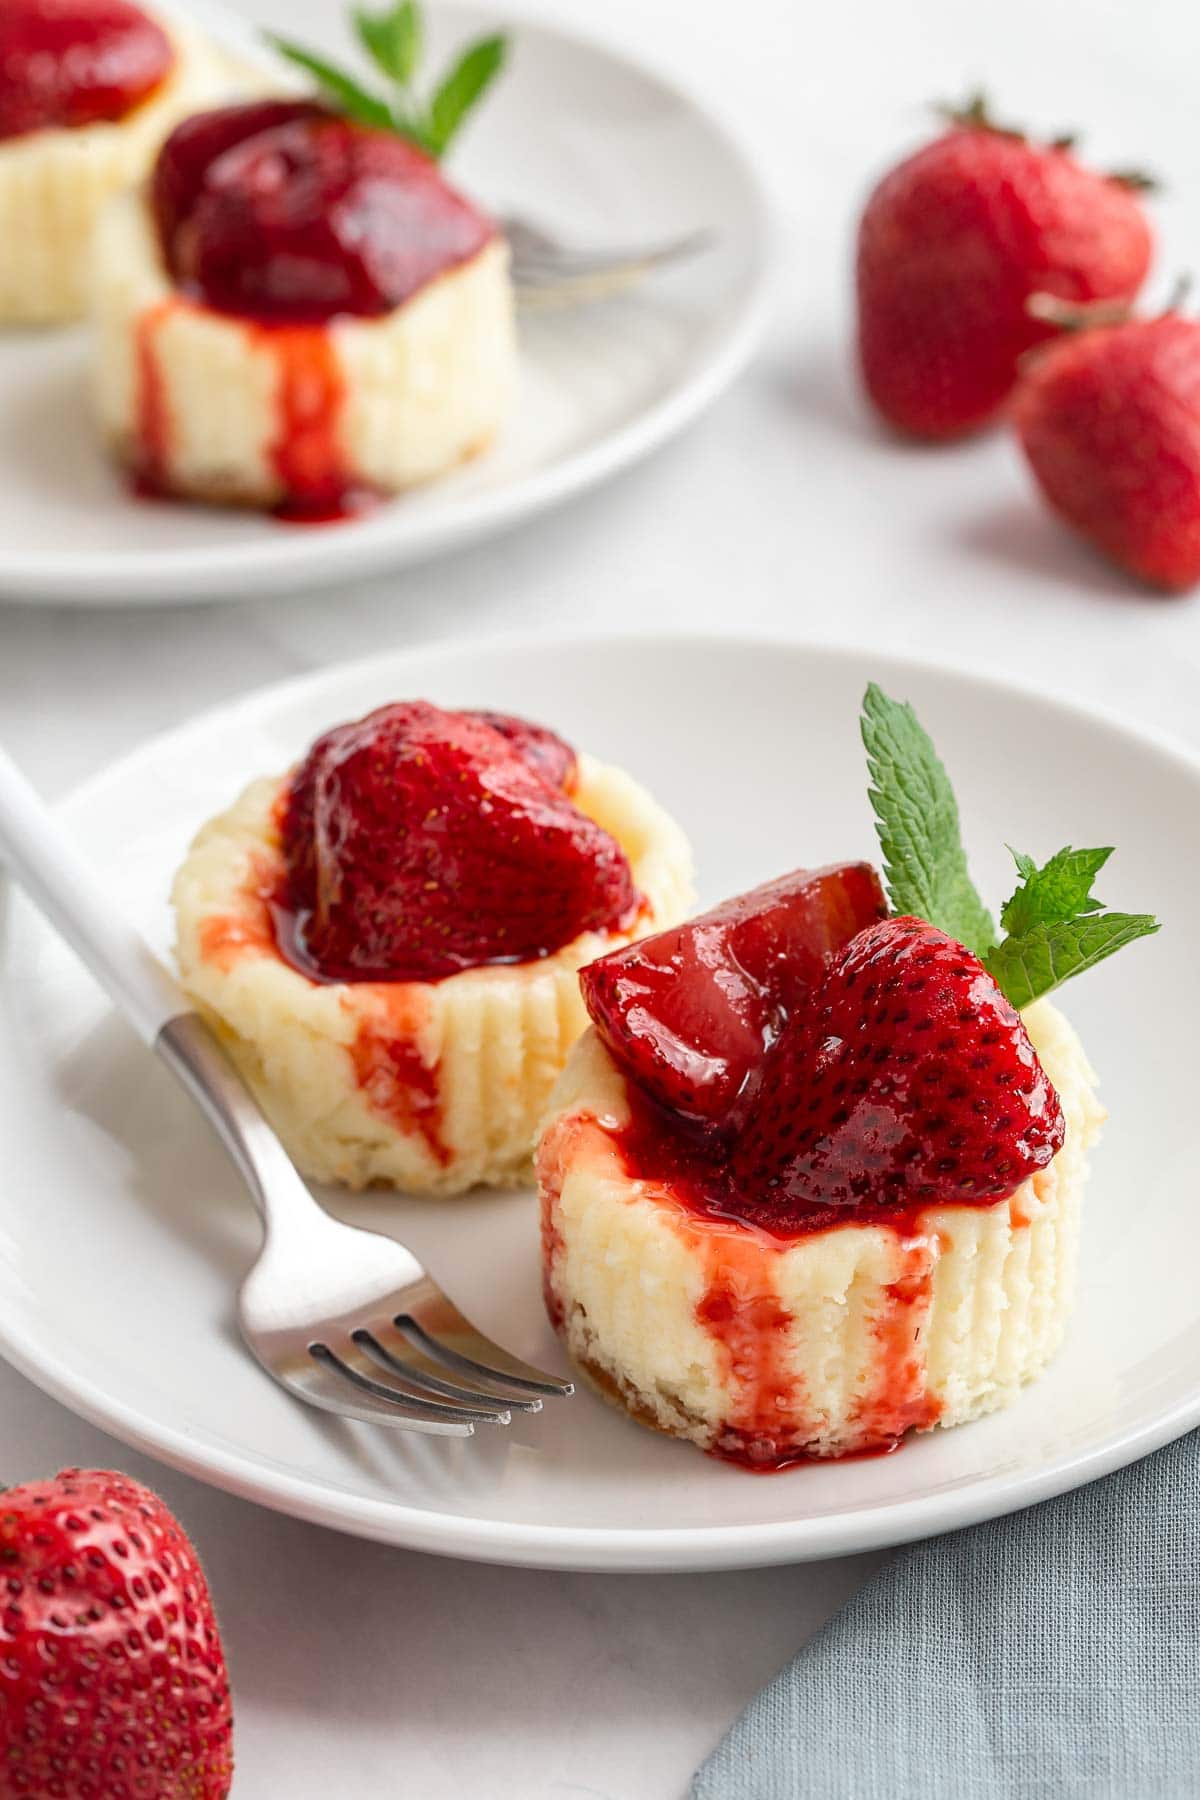 Small cheesecakes in a muffin pan.